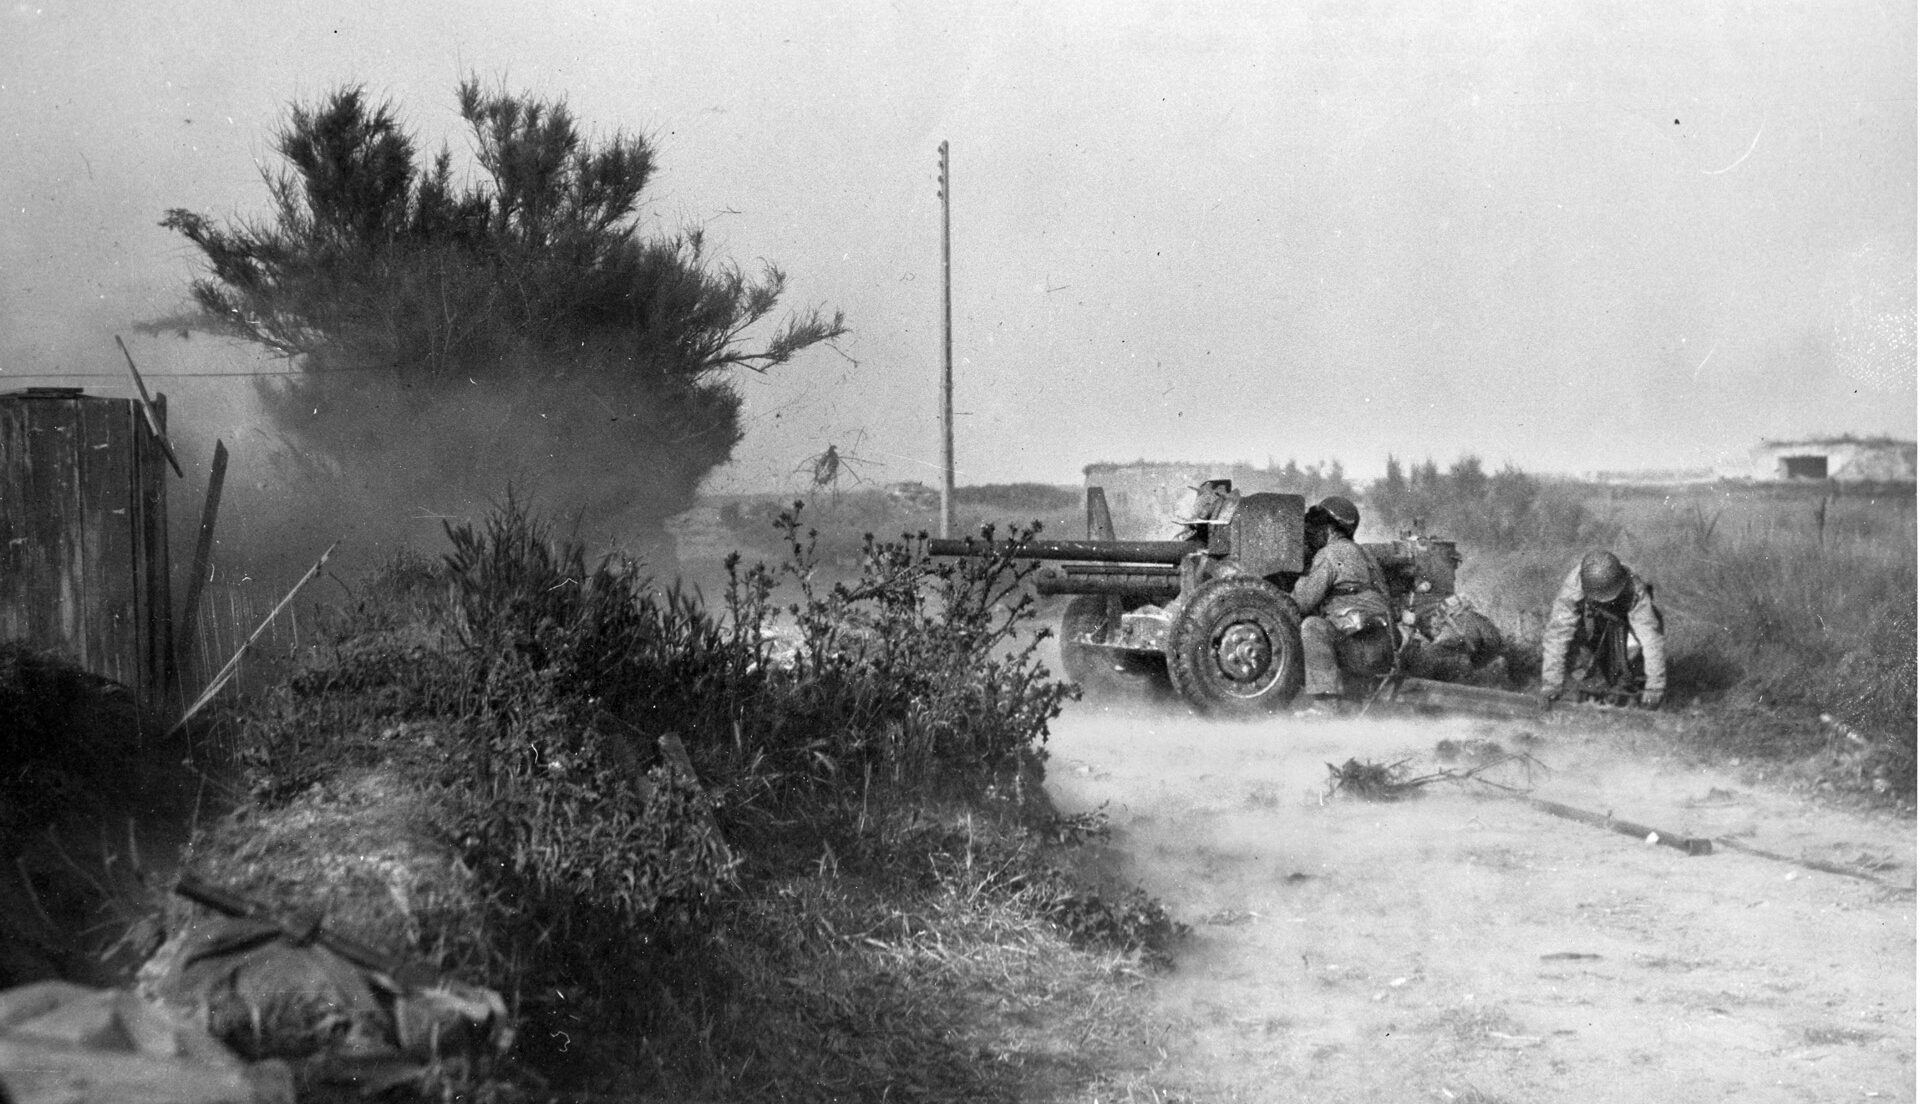 American paratroopers fired a 57mm anti-tank gun at the Germans during the early stages of the fight. The 57mm gun was the heaviest weapon available to the lightly armed paratroopers and provided much-needed firepower during desperate hours of combat against repeated German counterattacks.